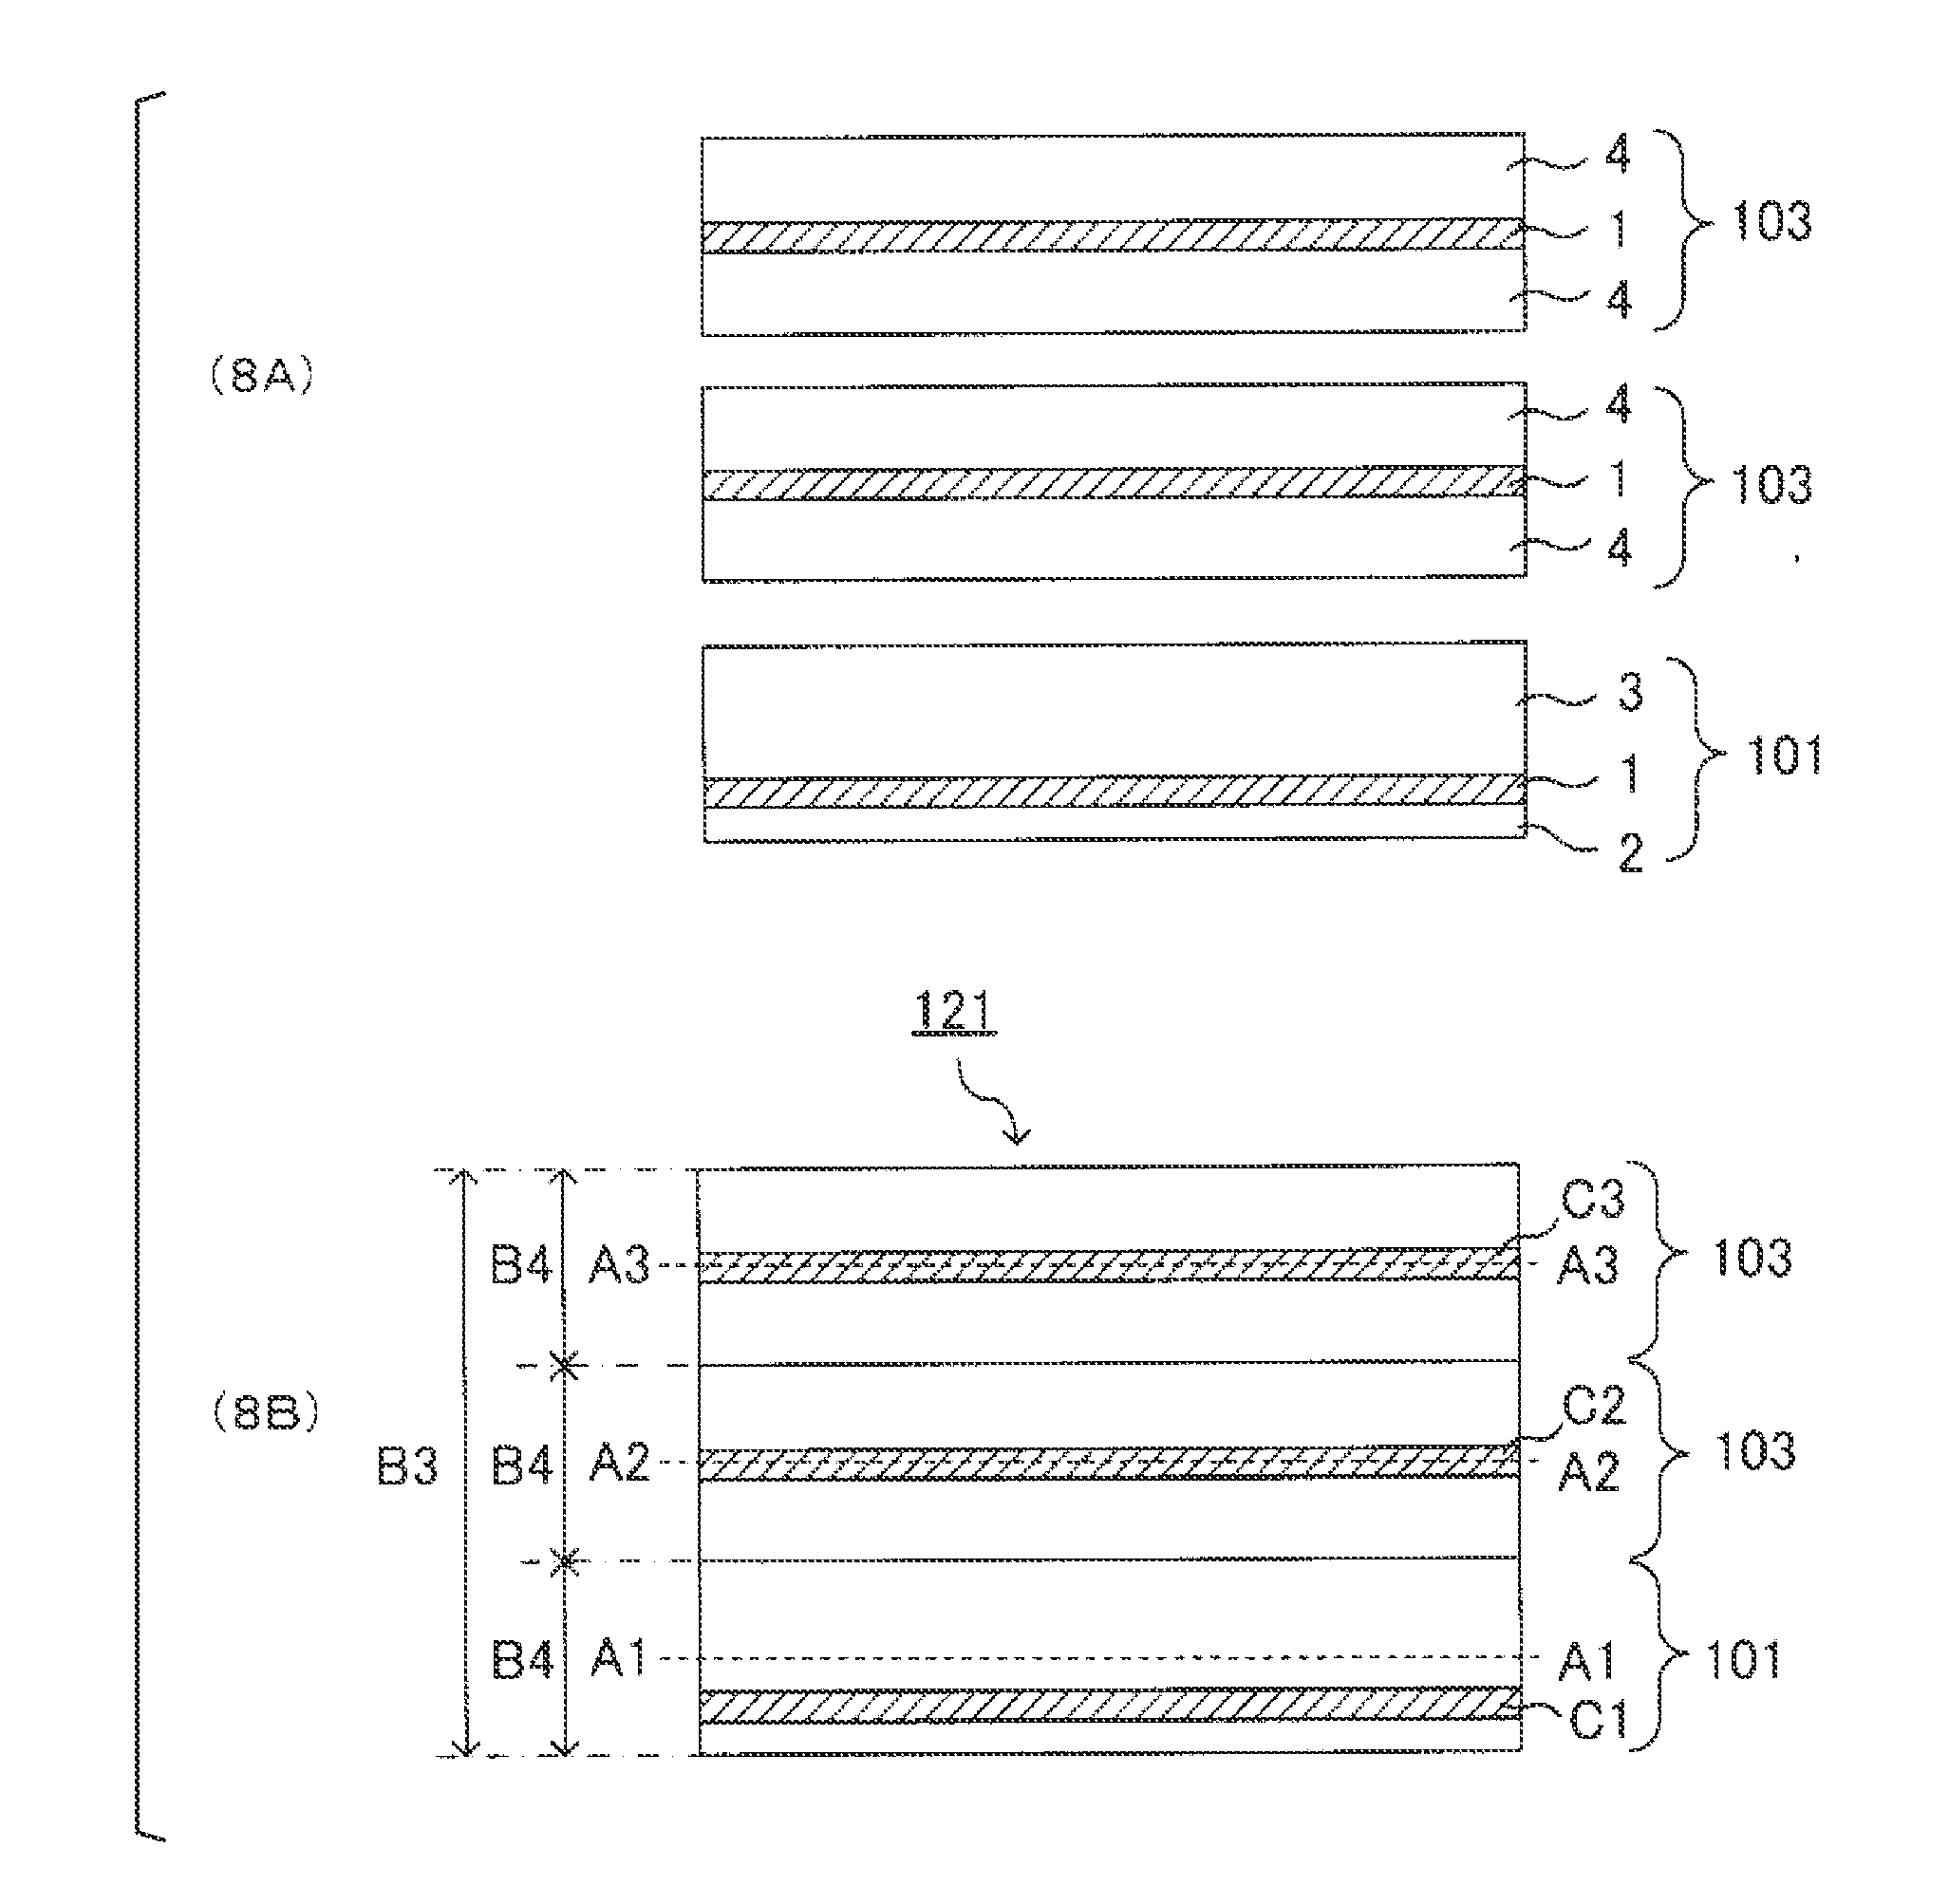 Insulating substrate, metal-clad laminate, printed wiring board and semiconductor device